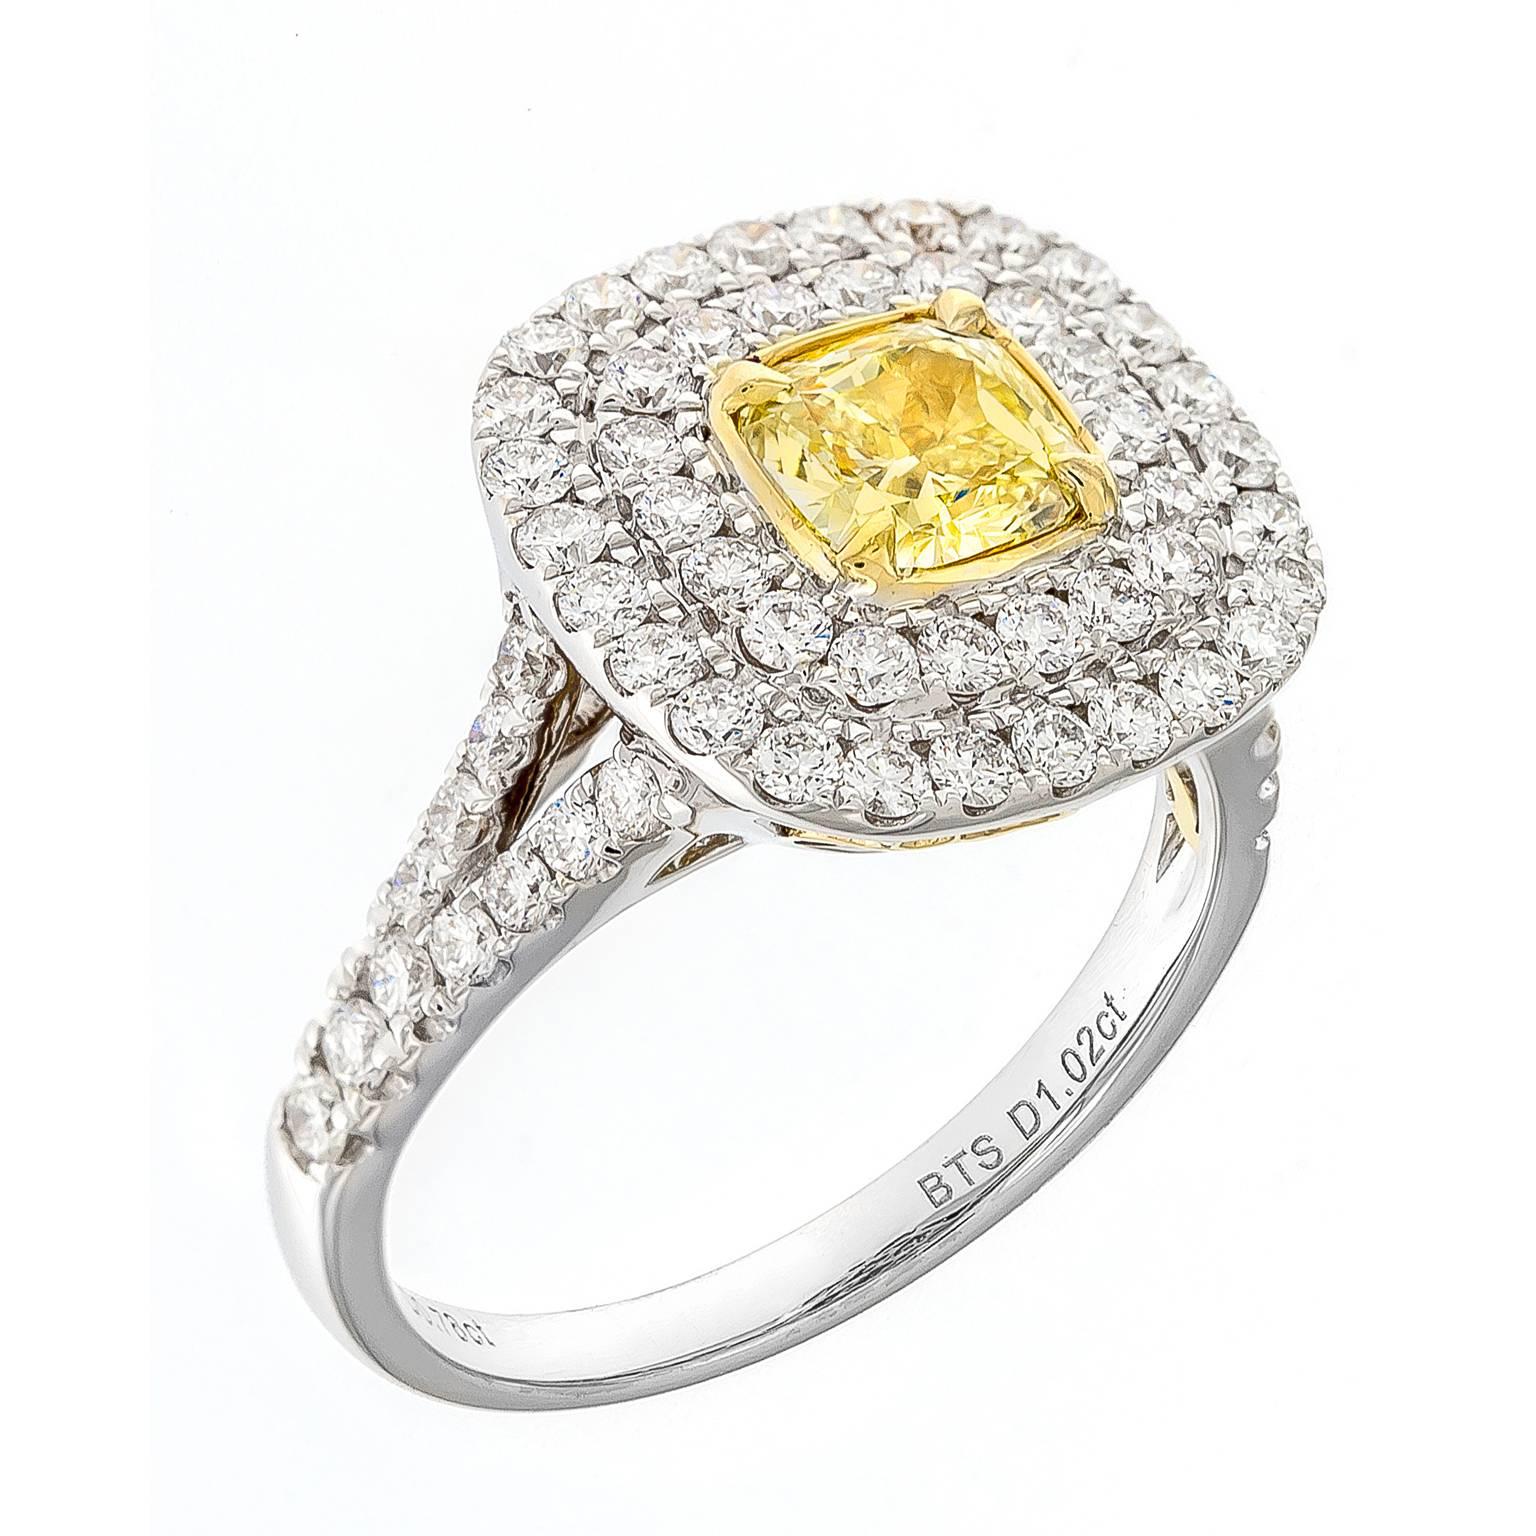 This elegant double halo ring masterfully displays the fancy intense natural yellow cushion cut diamond. The center stone is surrounded by a double halo of white diamonds, framed in 18k white and yellow gold. It is beautifully balanced by pave